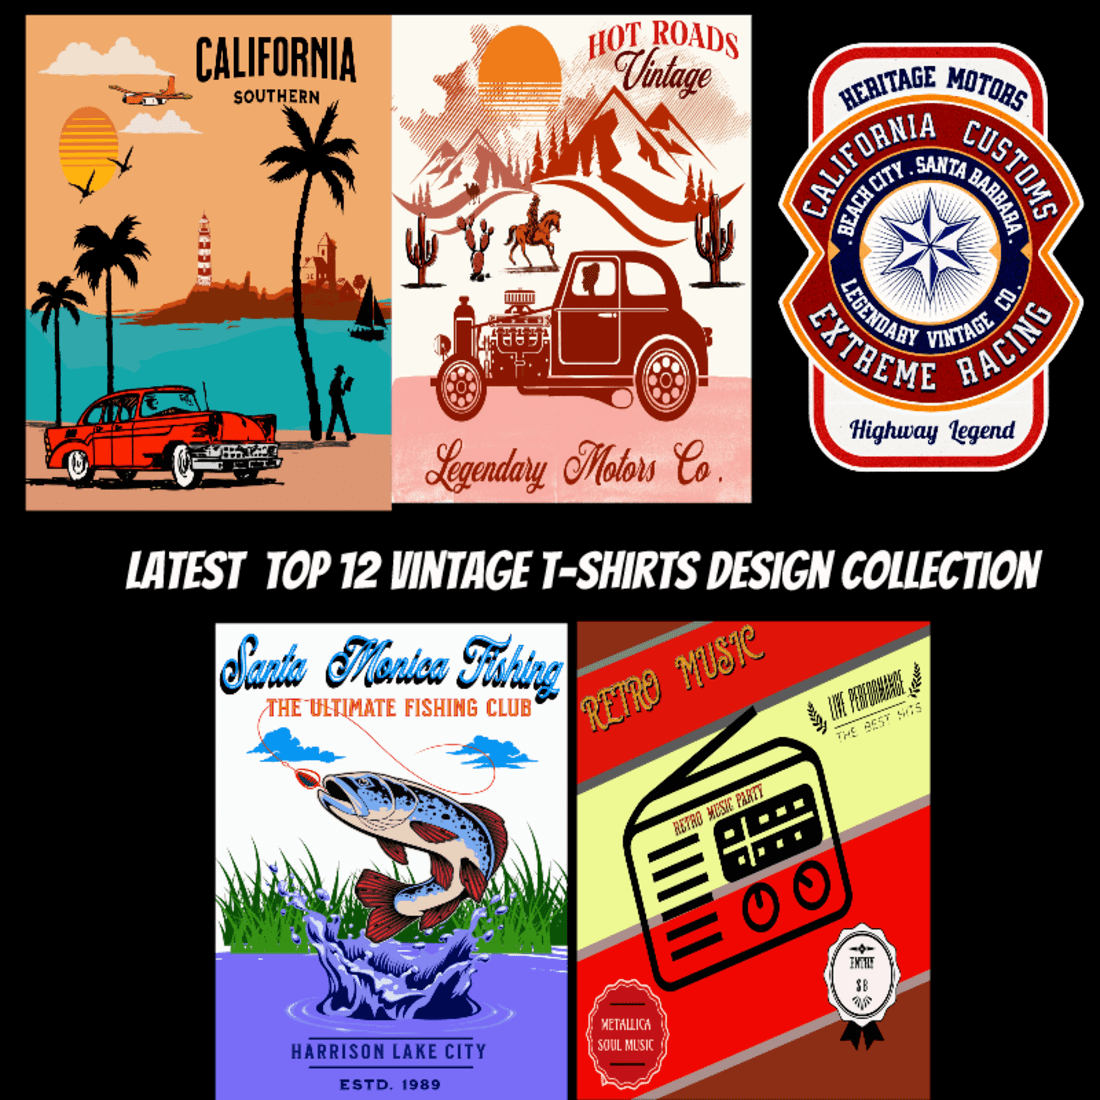 Vintage T-shirts Graphics Collection cover image.